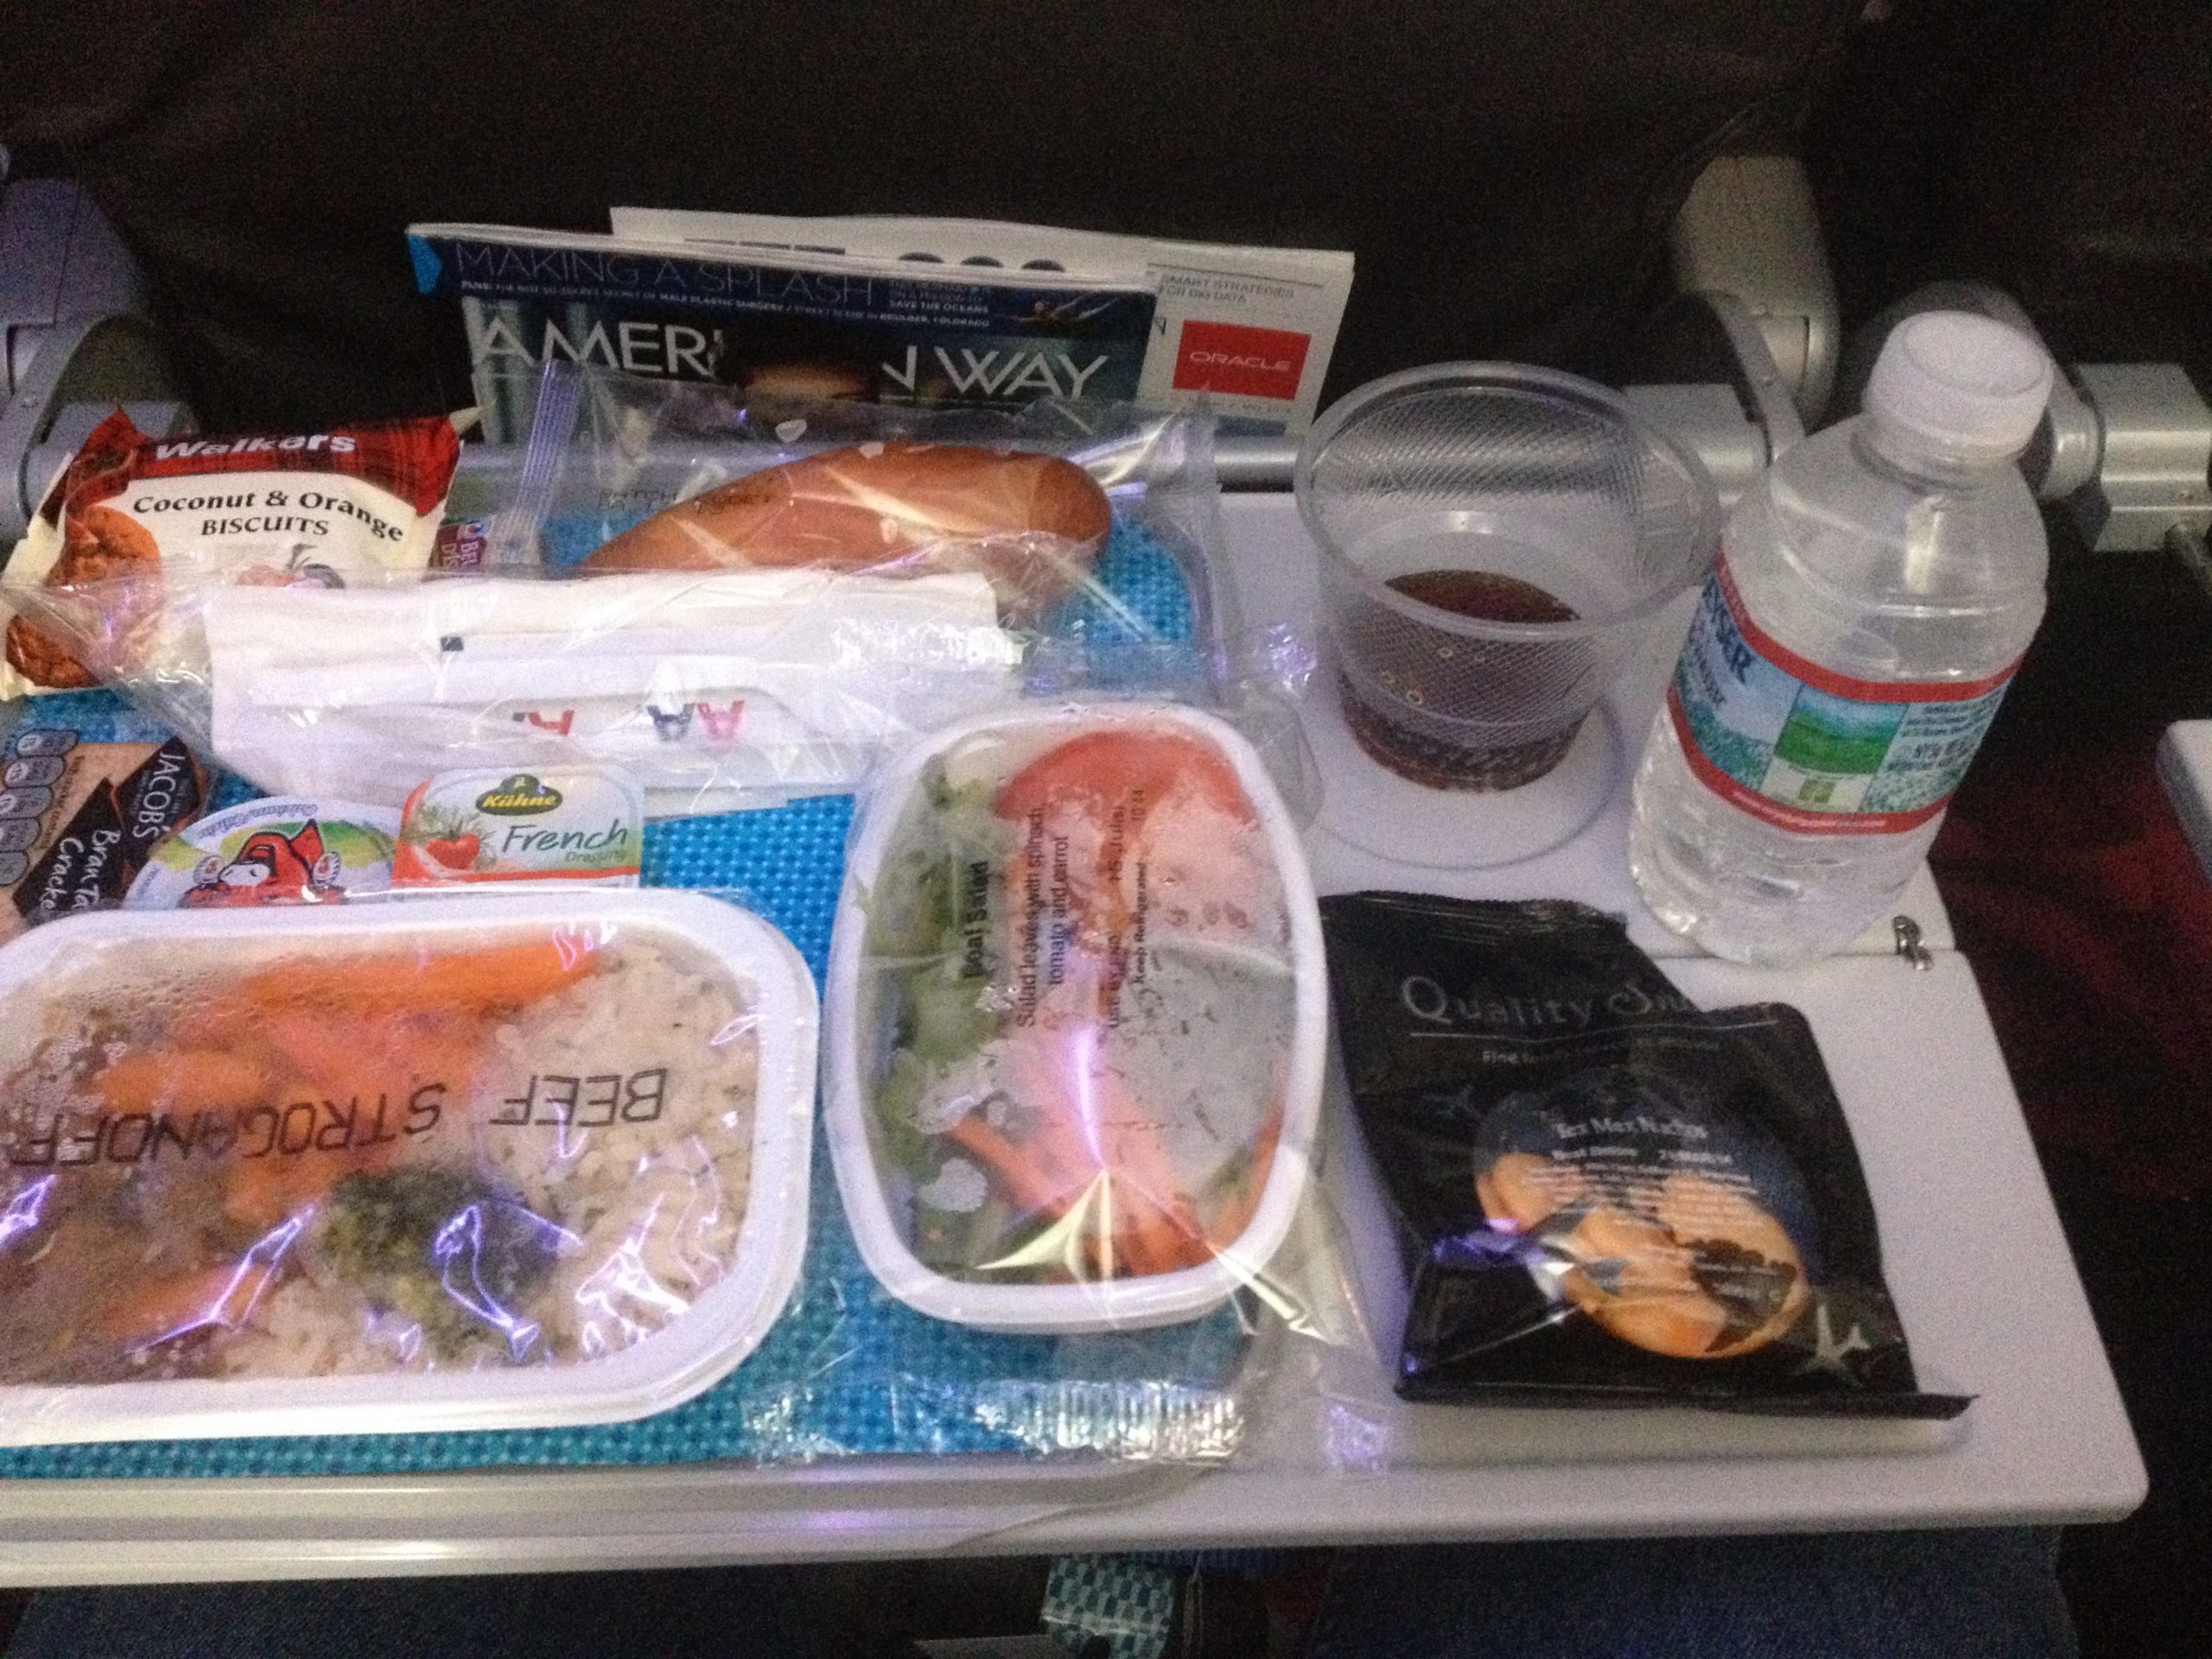 American Airlines Economy Class Lunch